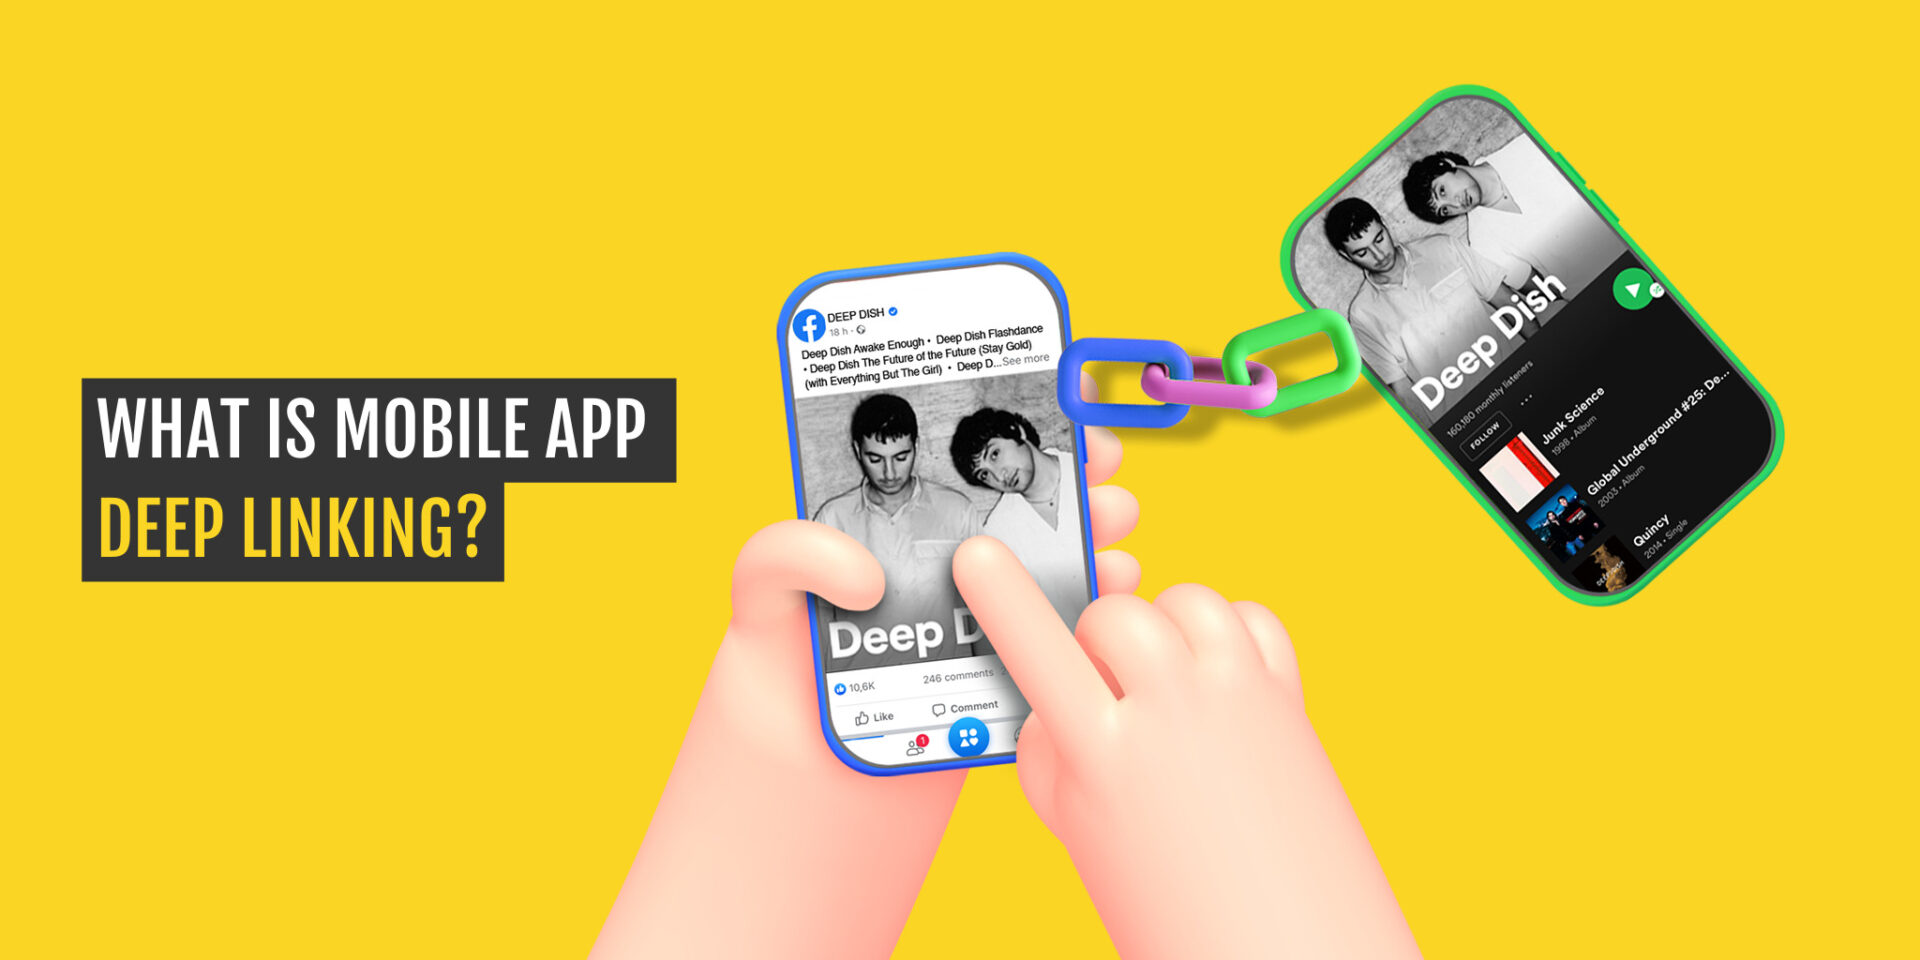 What is Mobile App Deep Linking?